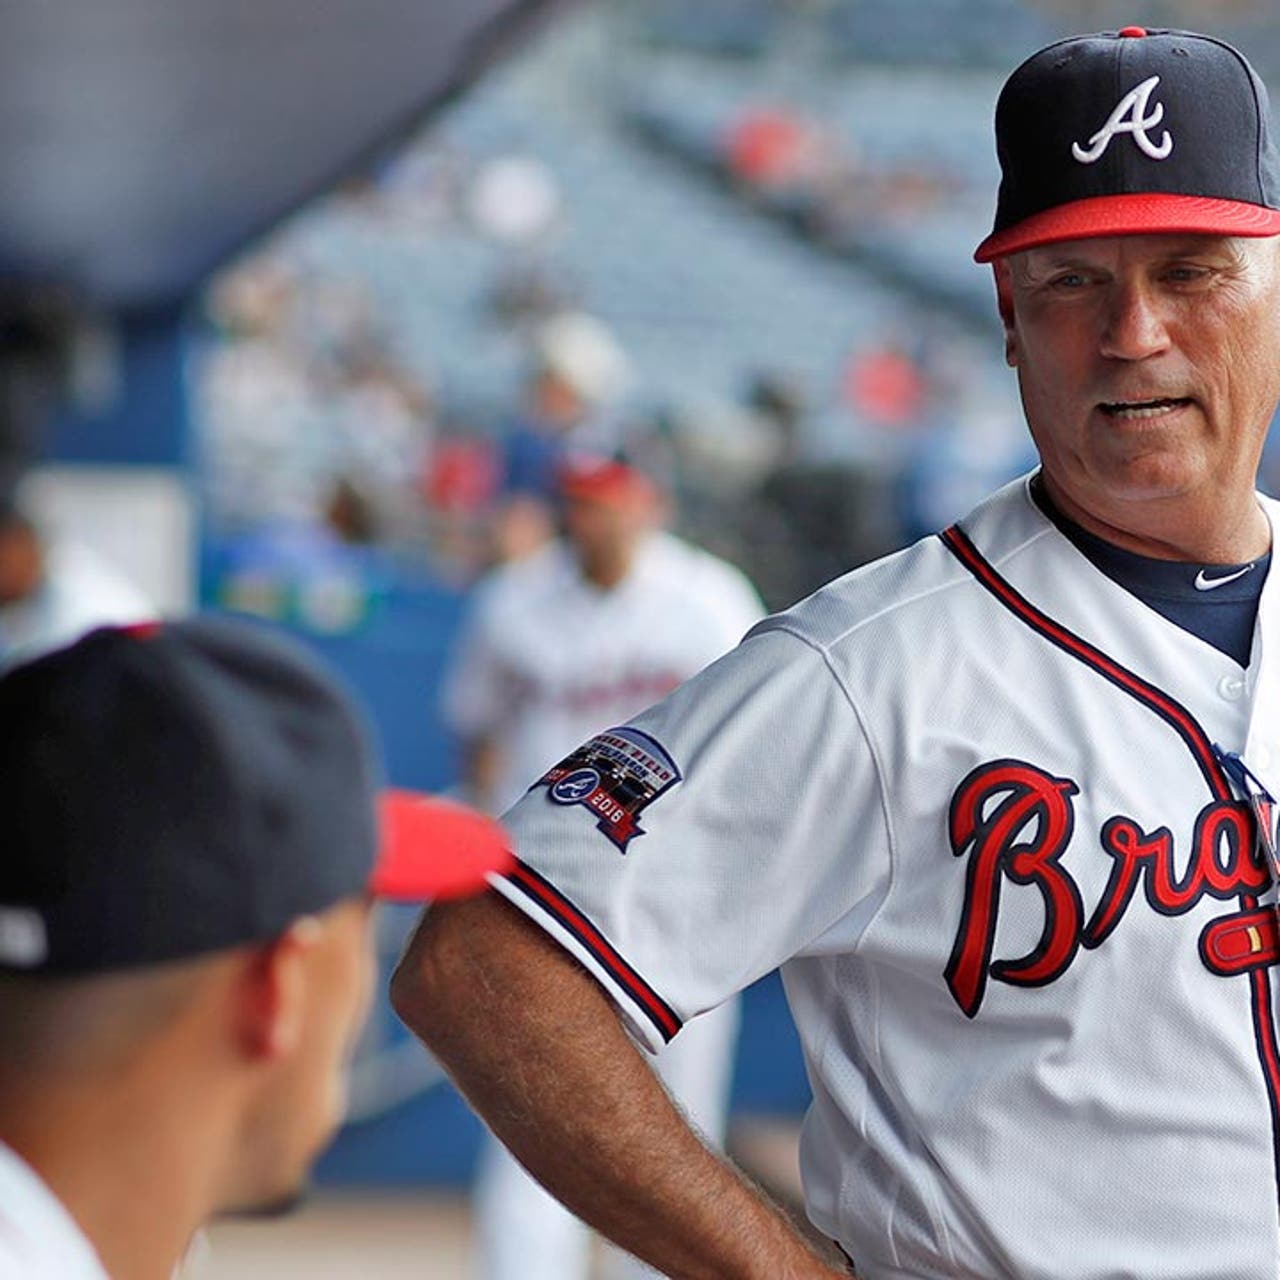 Colon sharp at old home, Kemp leads Braves over Mets in 12th